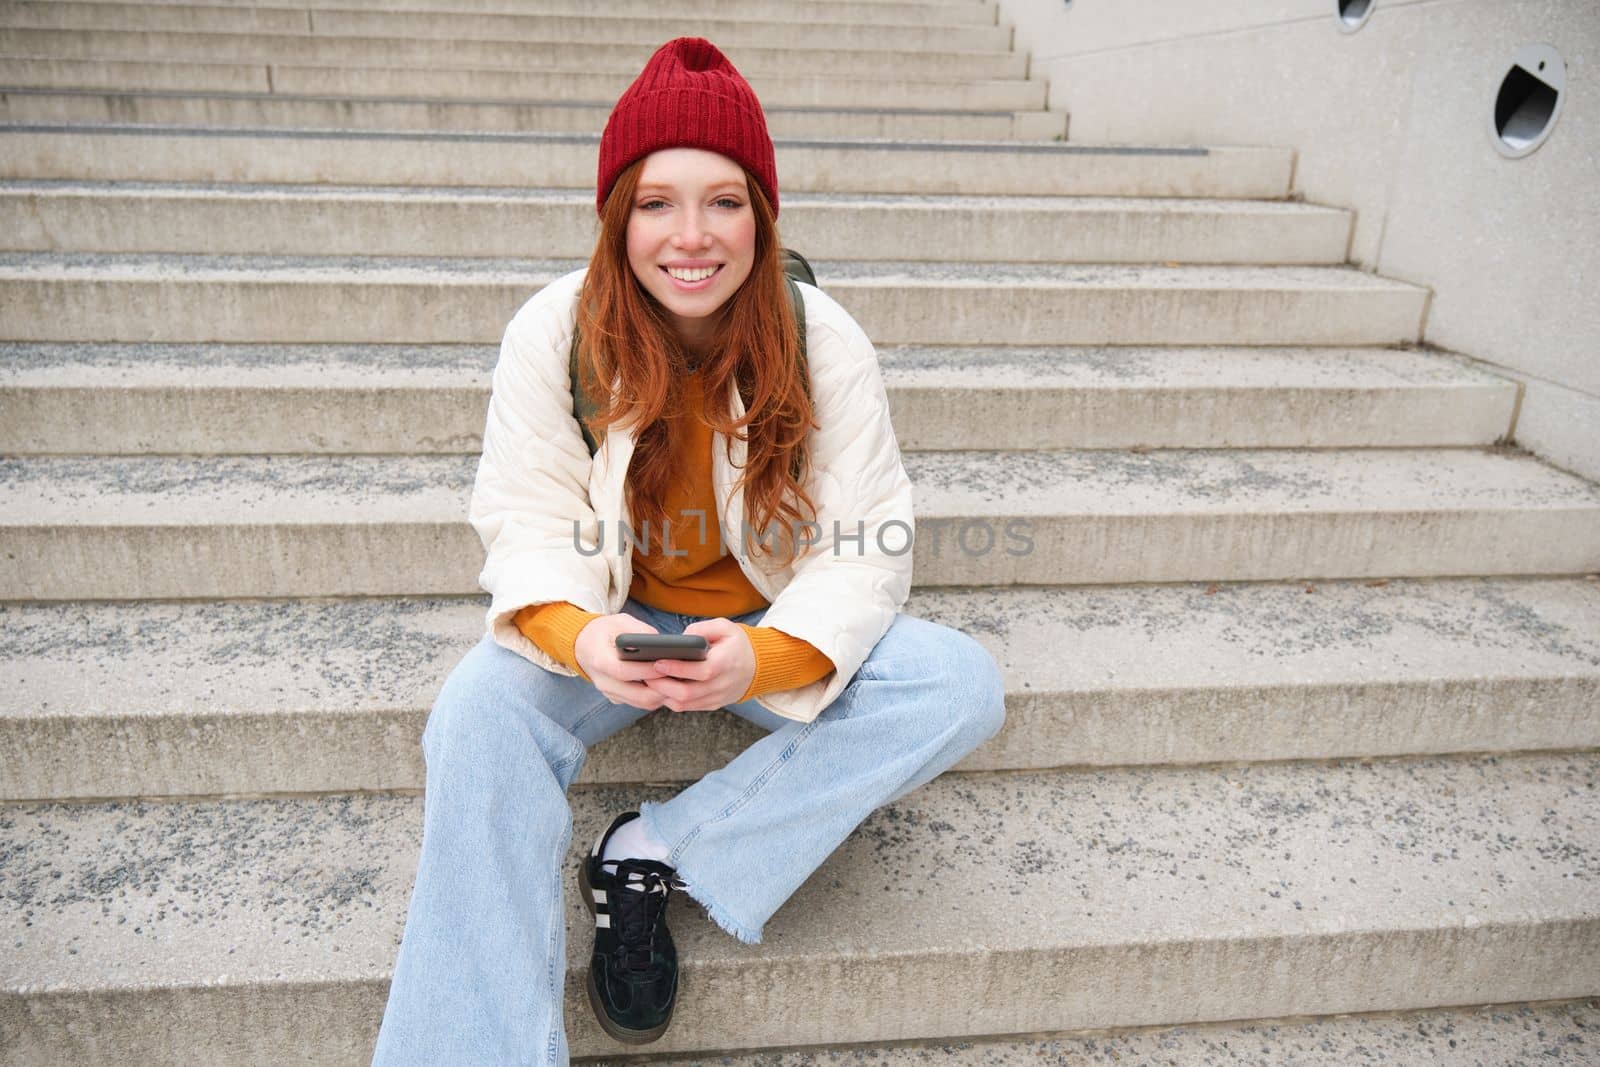 Hipster ginger girl, redhead woman sits on stairs with smartphone, waits for someone and messages on social media on mobile phone app. People and technology concept